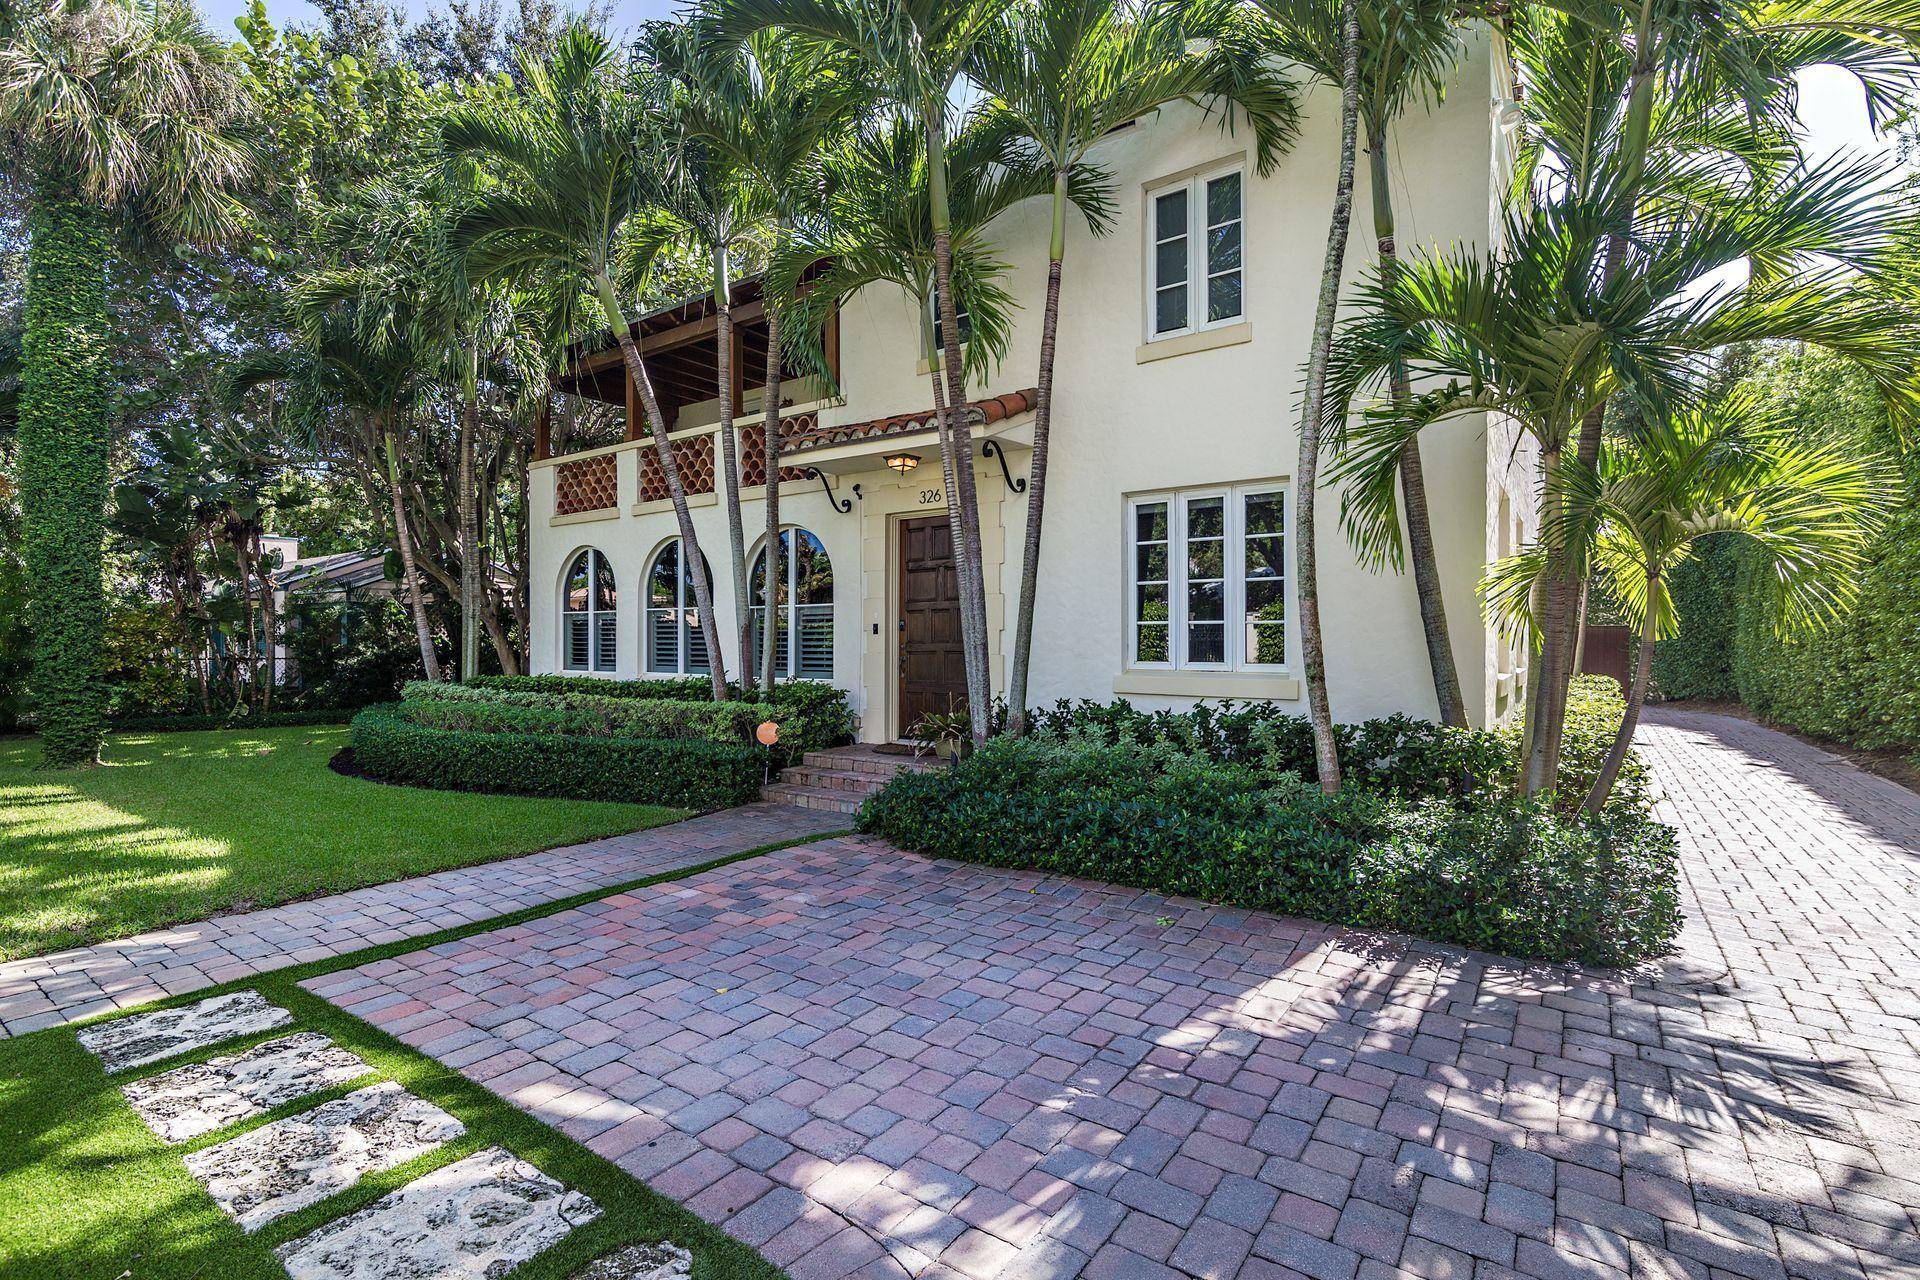 Situated in the heart of El Cid, this 1926 Mediterranean masterpiece boasts 5 bedrooms and 4.